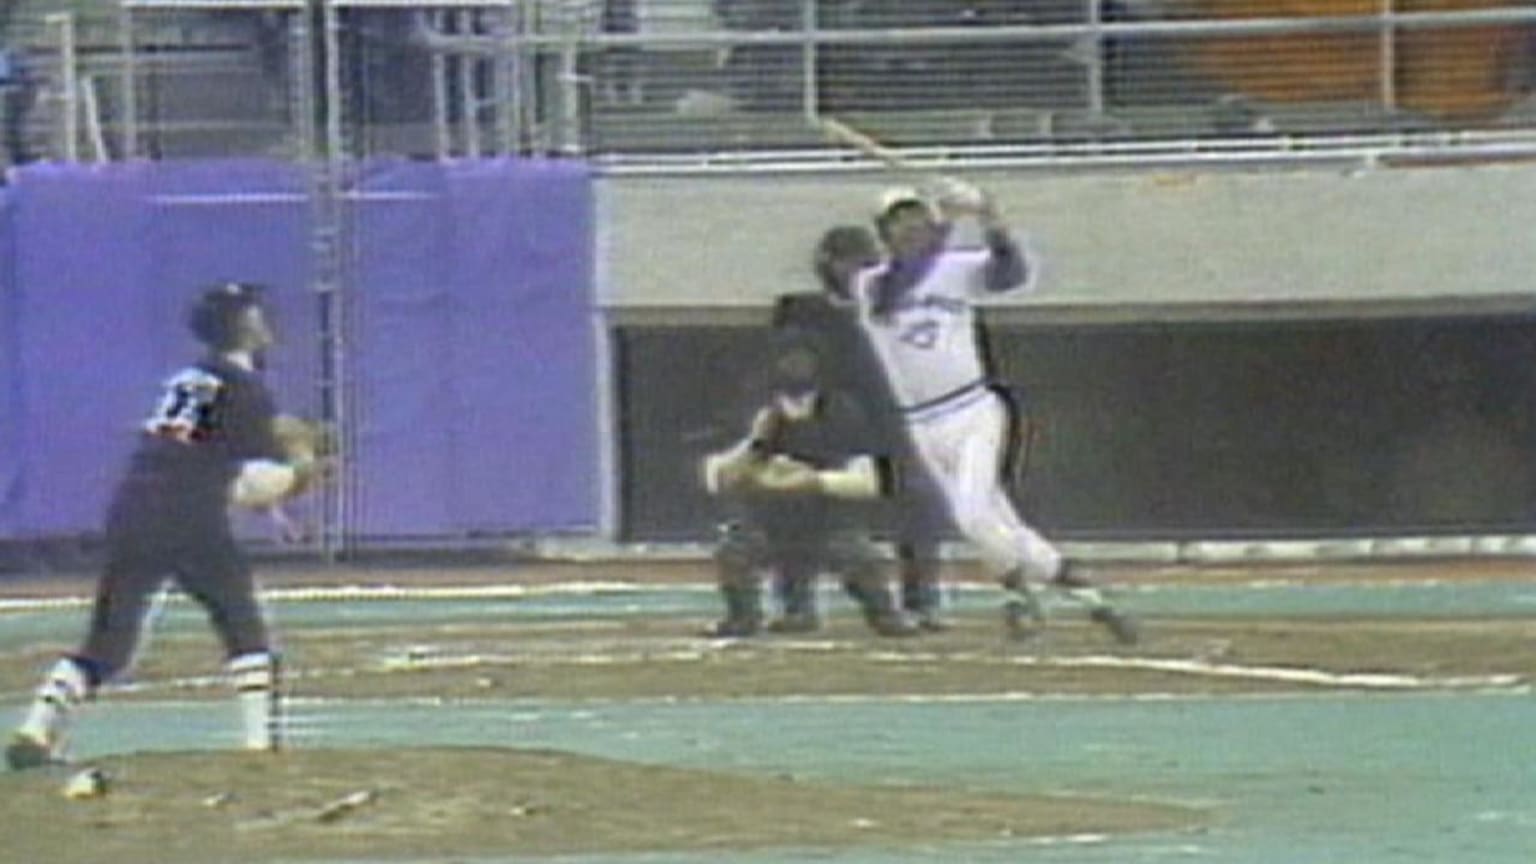 First home run in Jays history, 04/07/1977